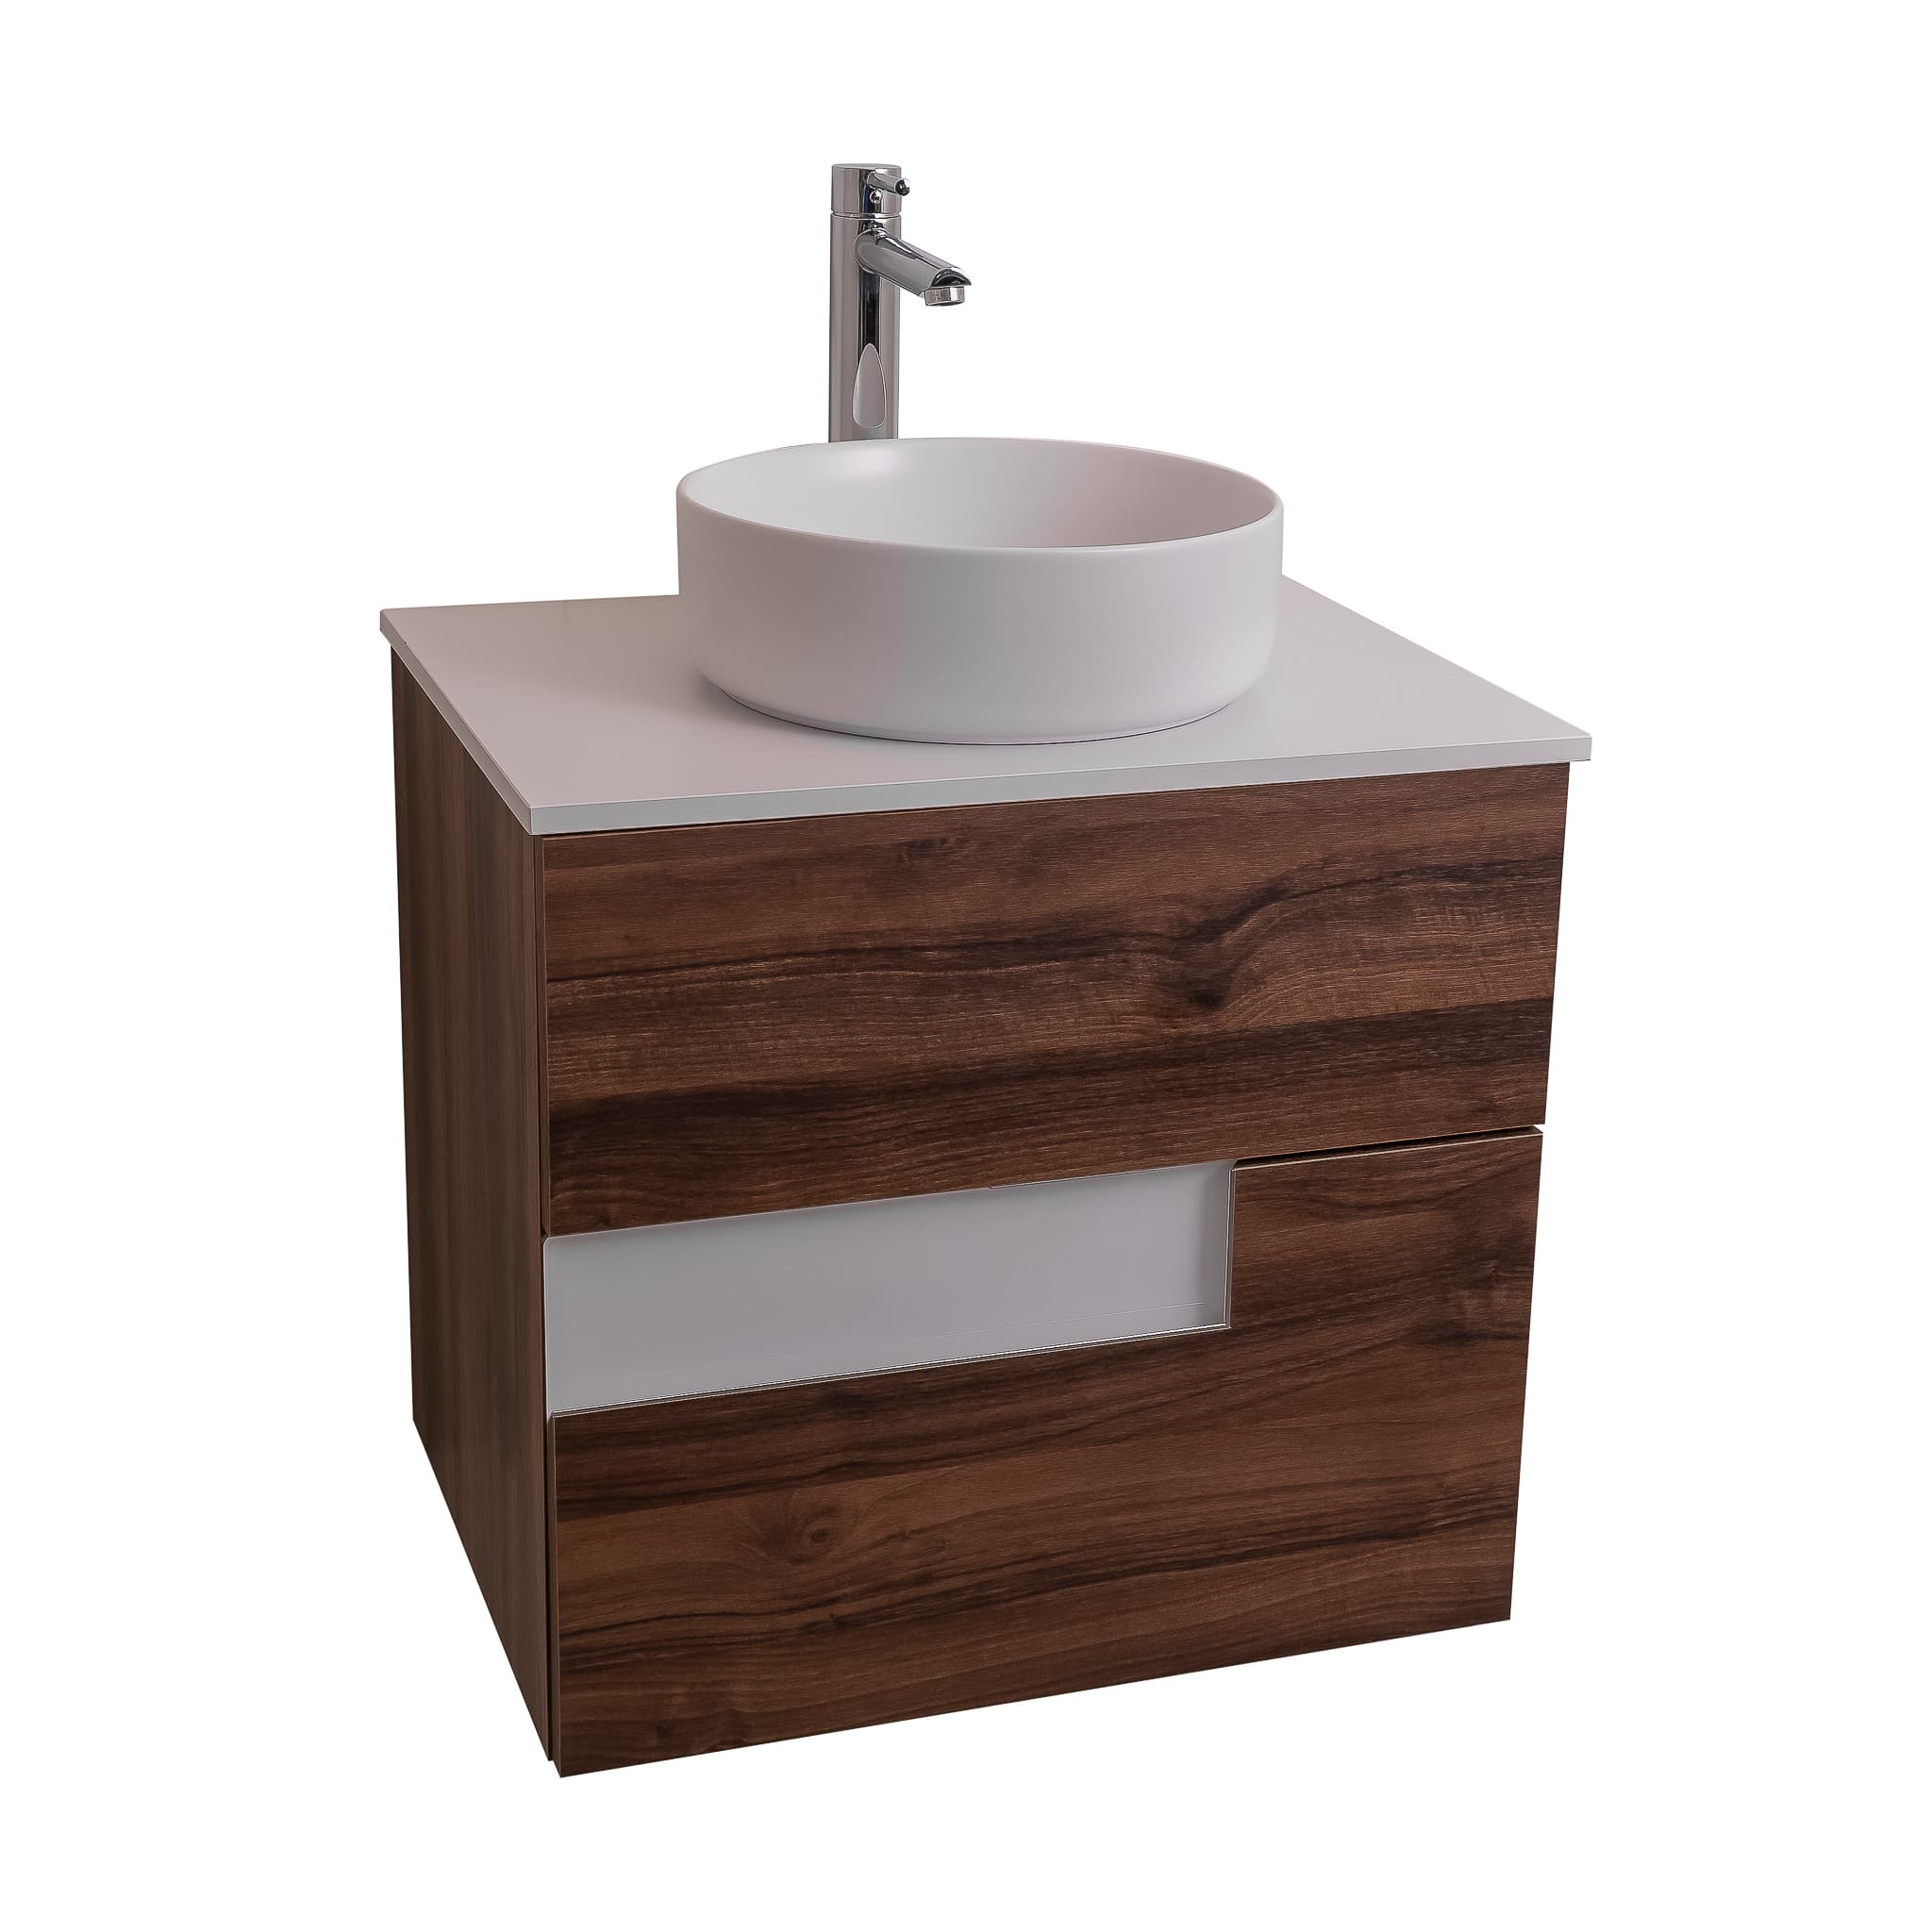 Vision 23.5 Valenti Medium Brown Wood Cabinet, Ares White Top And Ares White Ceramic Basin, Wall Mounted Modern Vanity Set